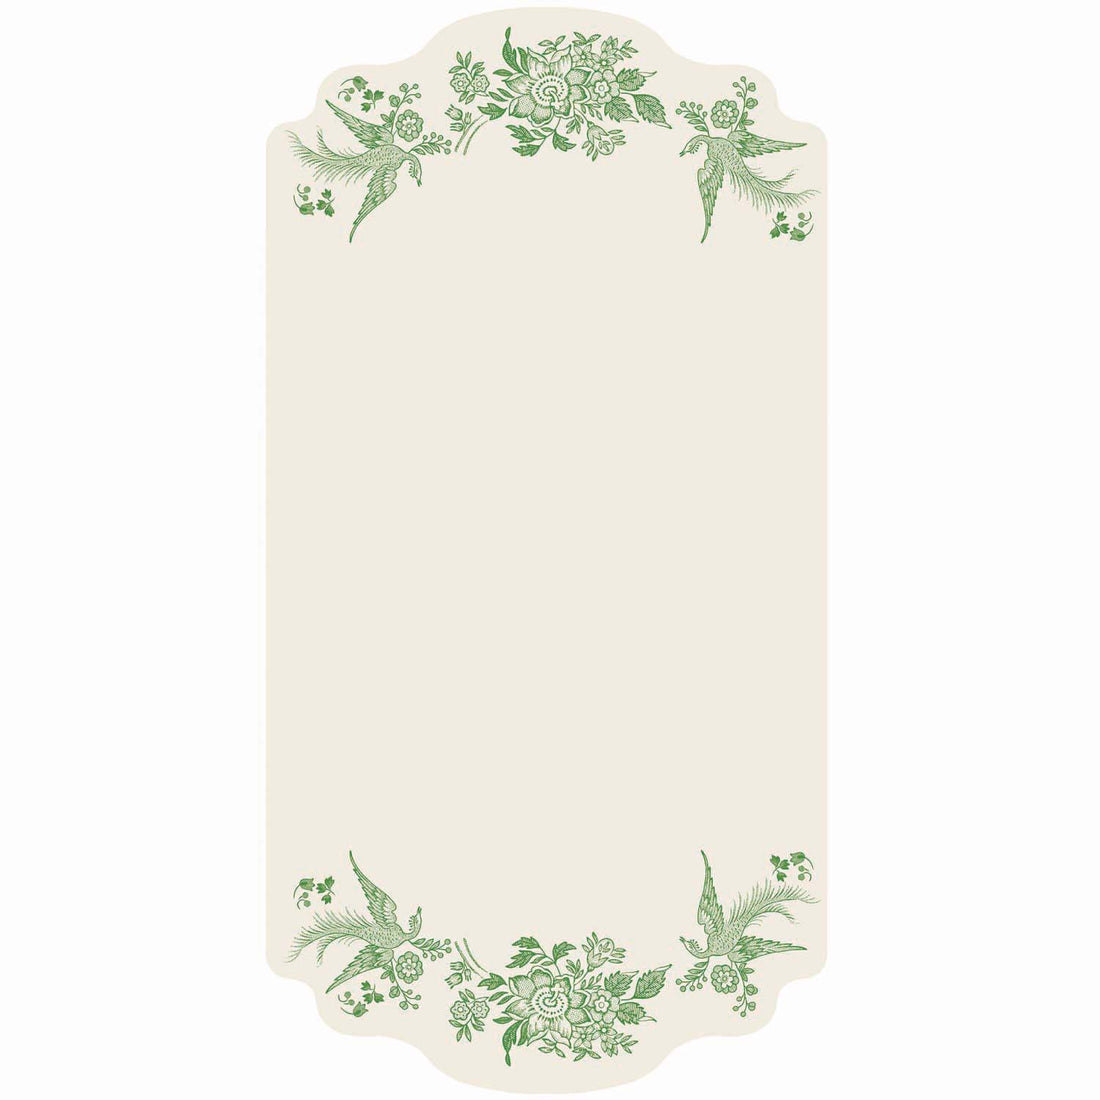 An Hester &amp; Cook Green Asiatic Pheasants Table Card with a larger writing area and a floral design.